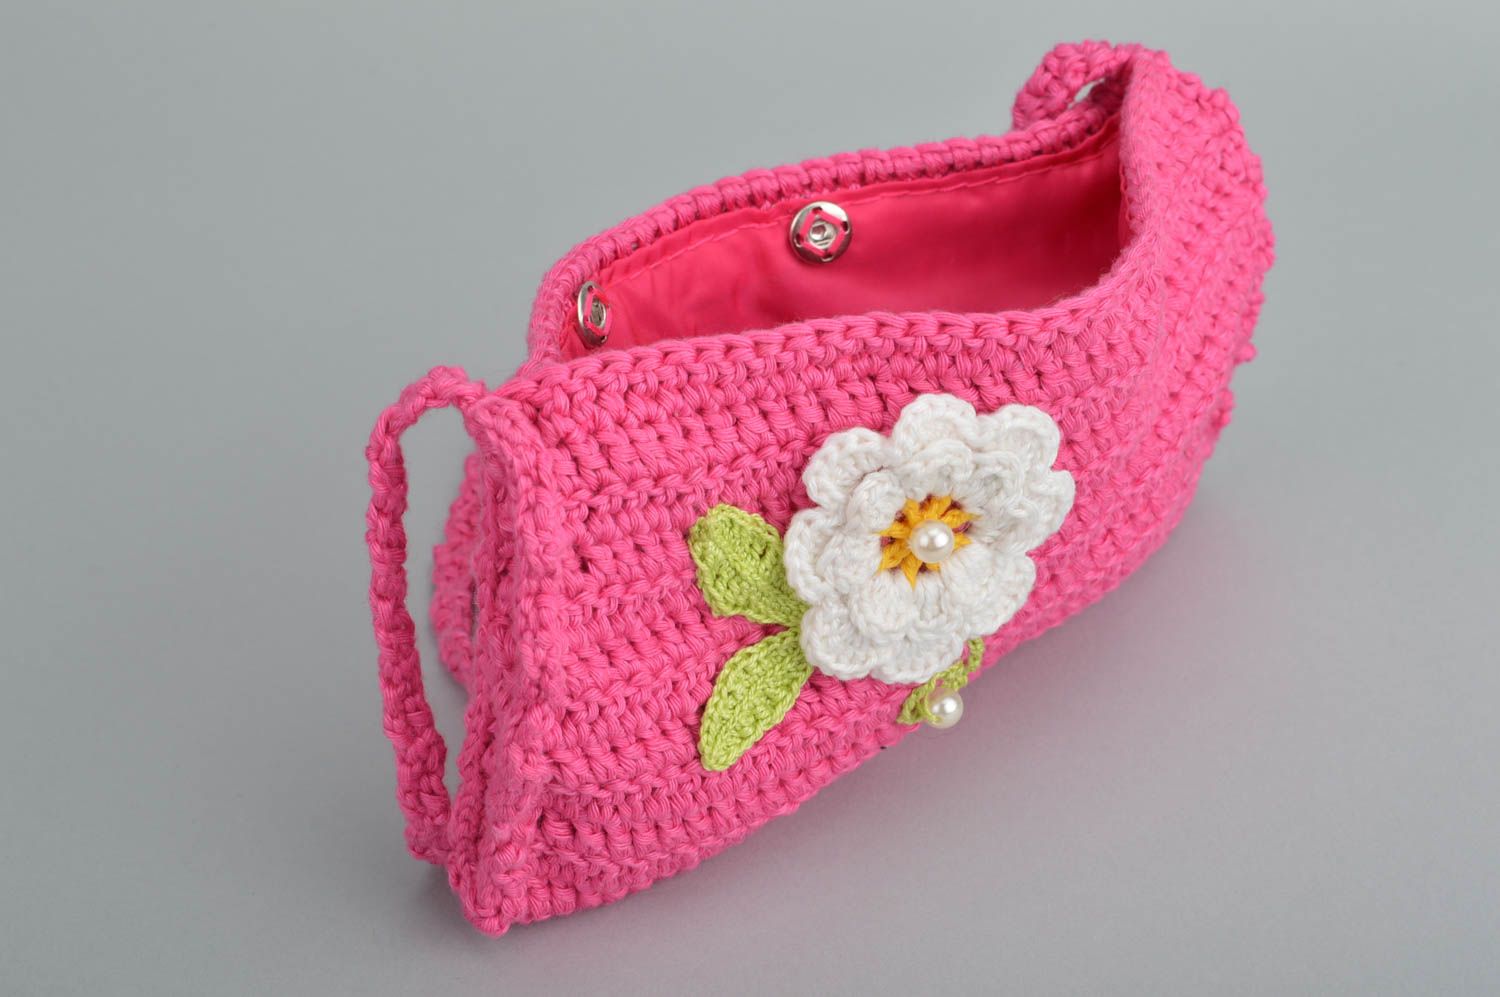 Pink beautiful handmade bag for kids woven of cotton threads with handles photo 3